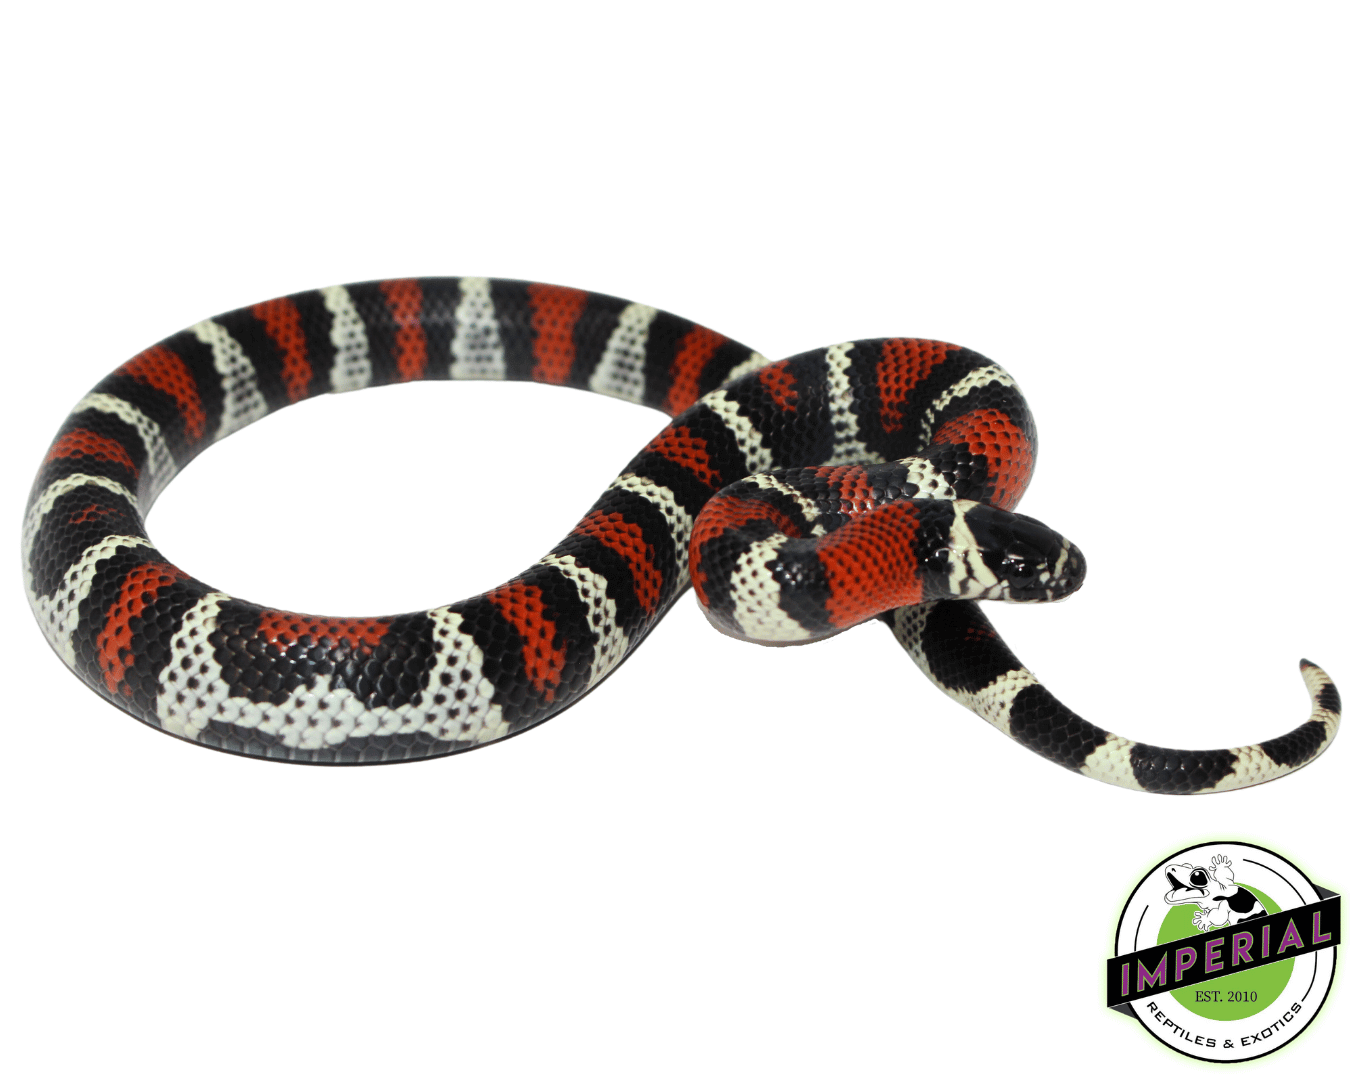 black milksnake for sale, buy reptiles online at cheap prices